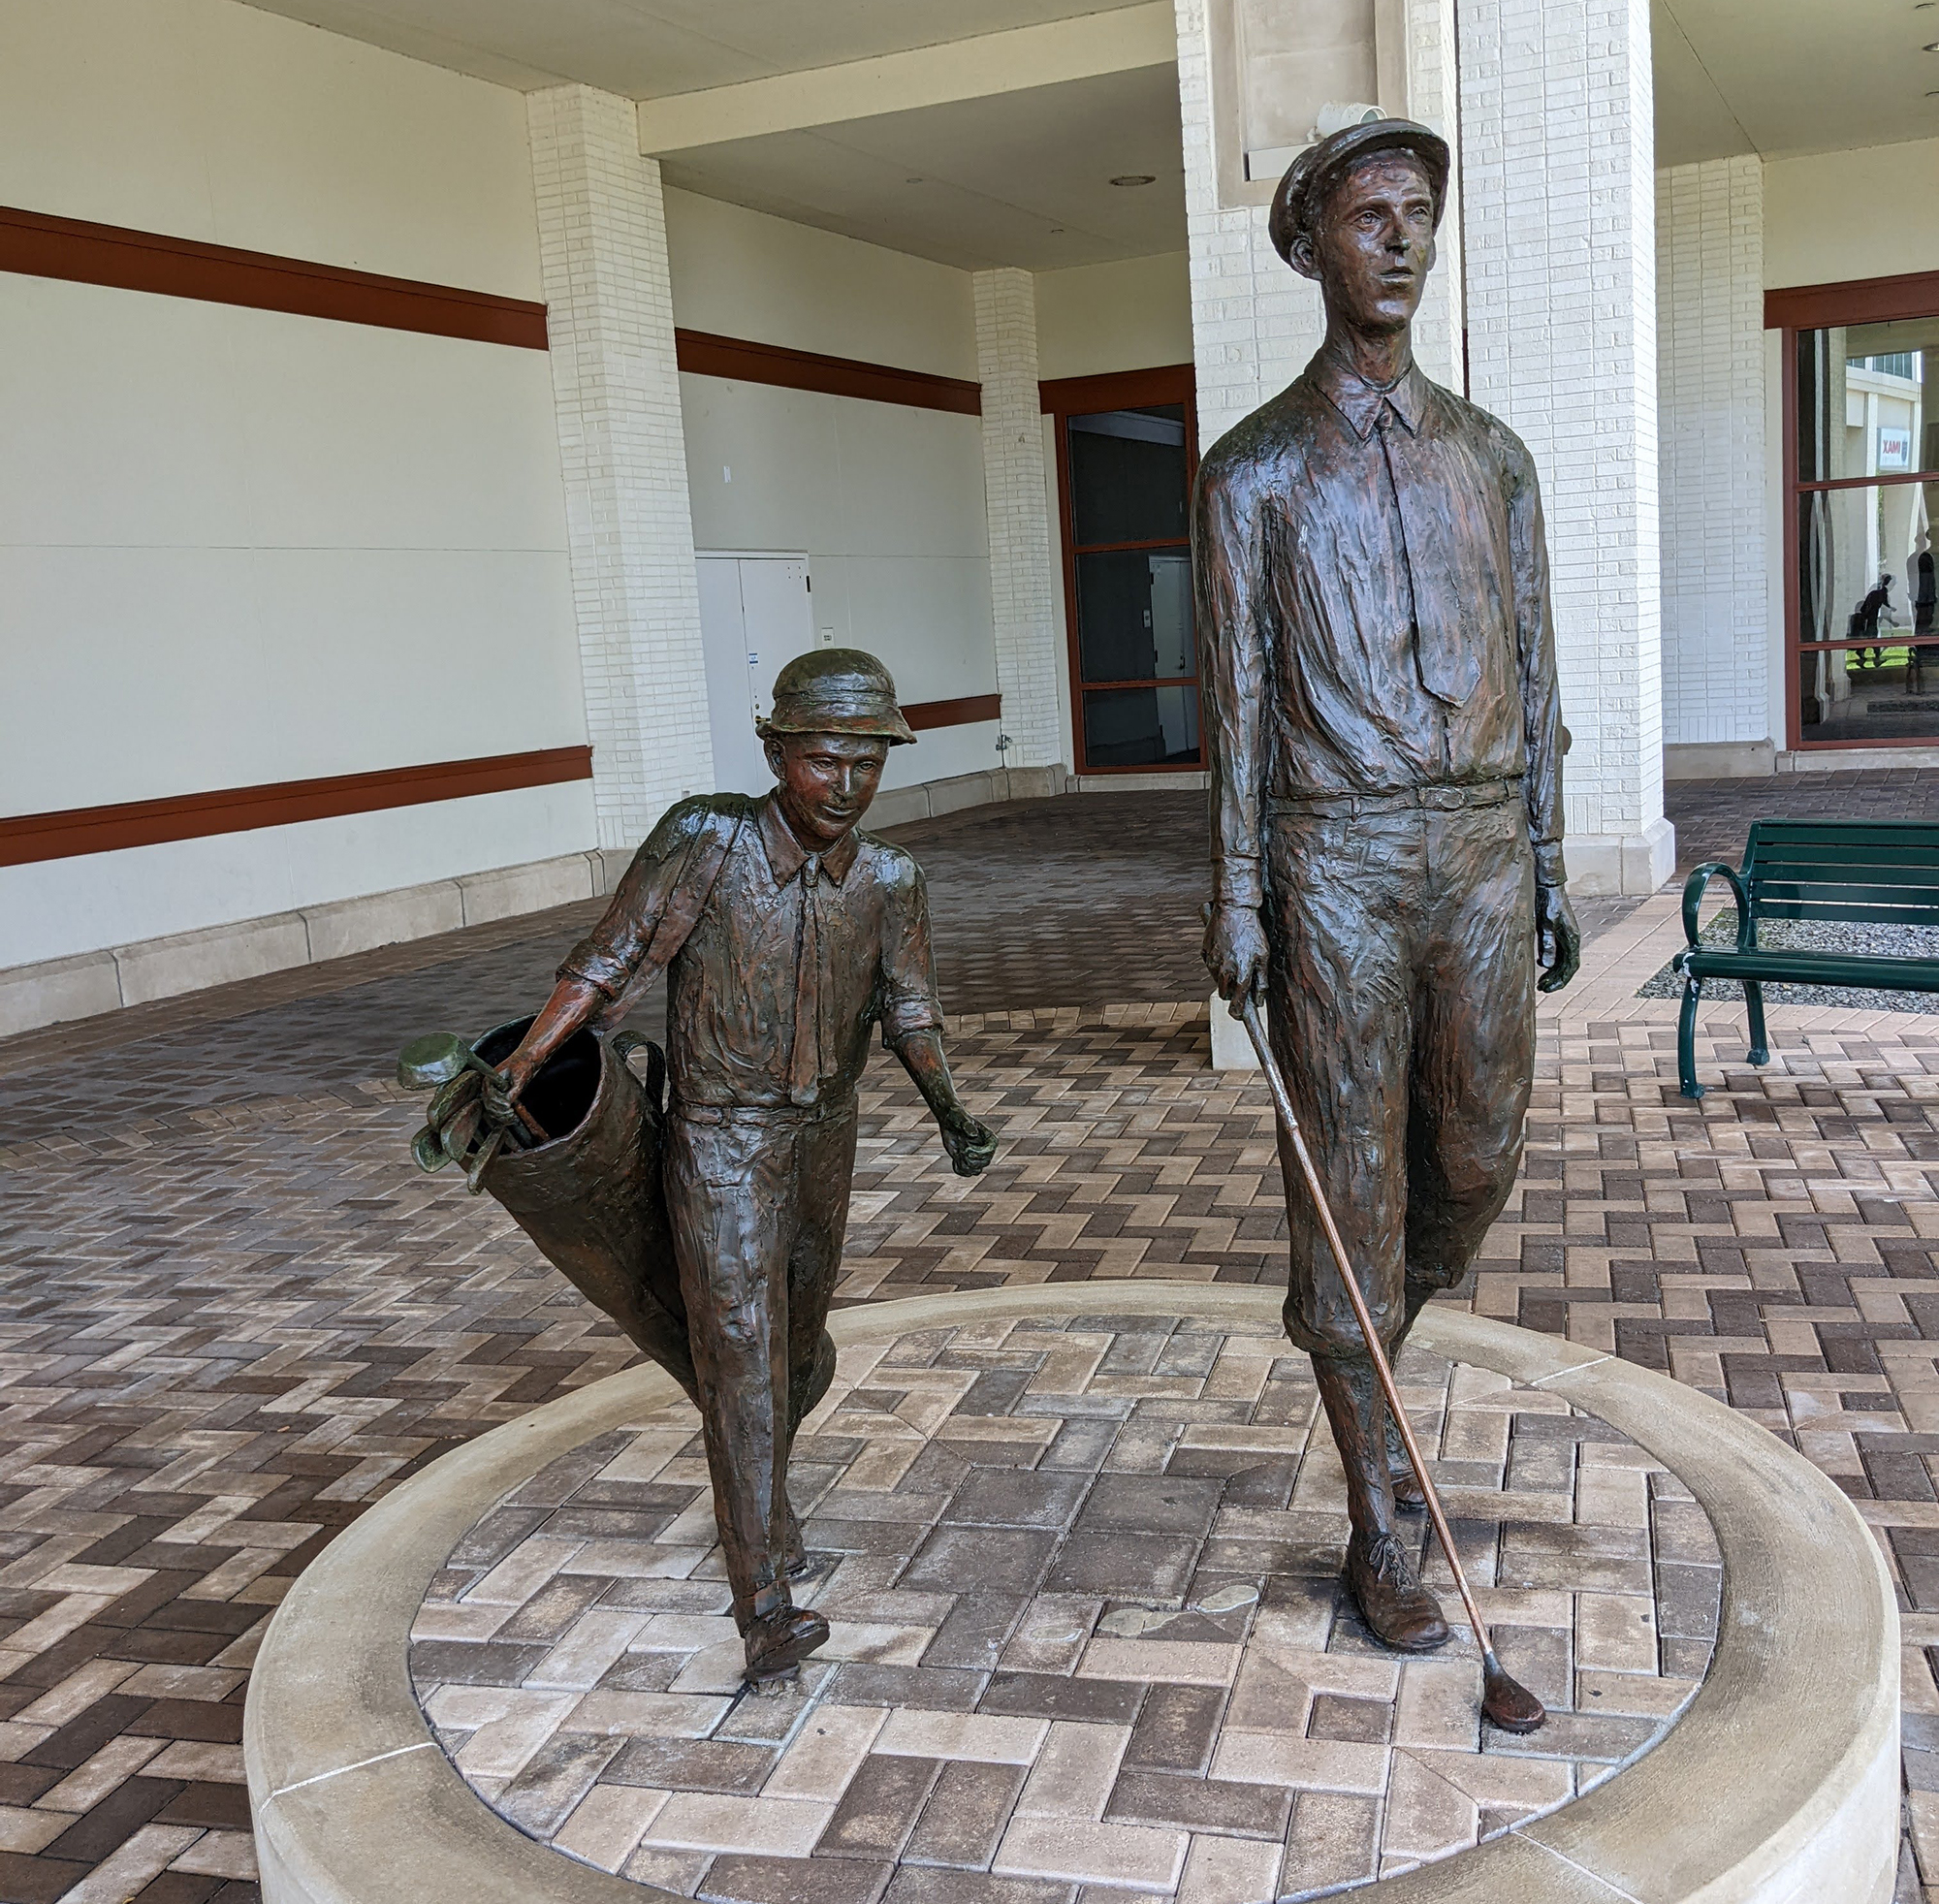 A statue depicting Francis D. Ouimet at the U.S. Open with his 10-year-old caddy, Eddie Lowery, at the Hall of Fame. Ouimet won the 1913 U.S. Open and was inducted into the World Golf Hall of Fame in 1974.